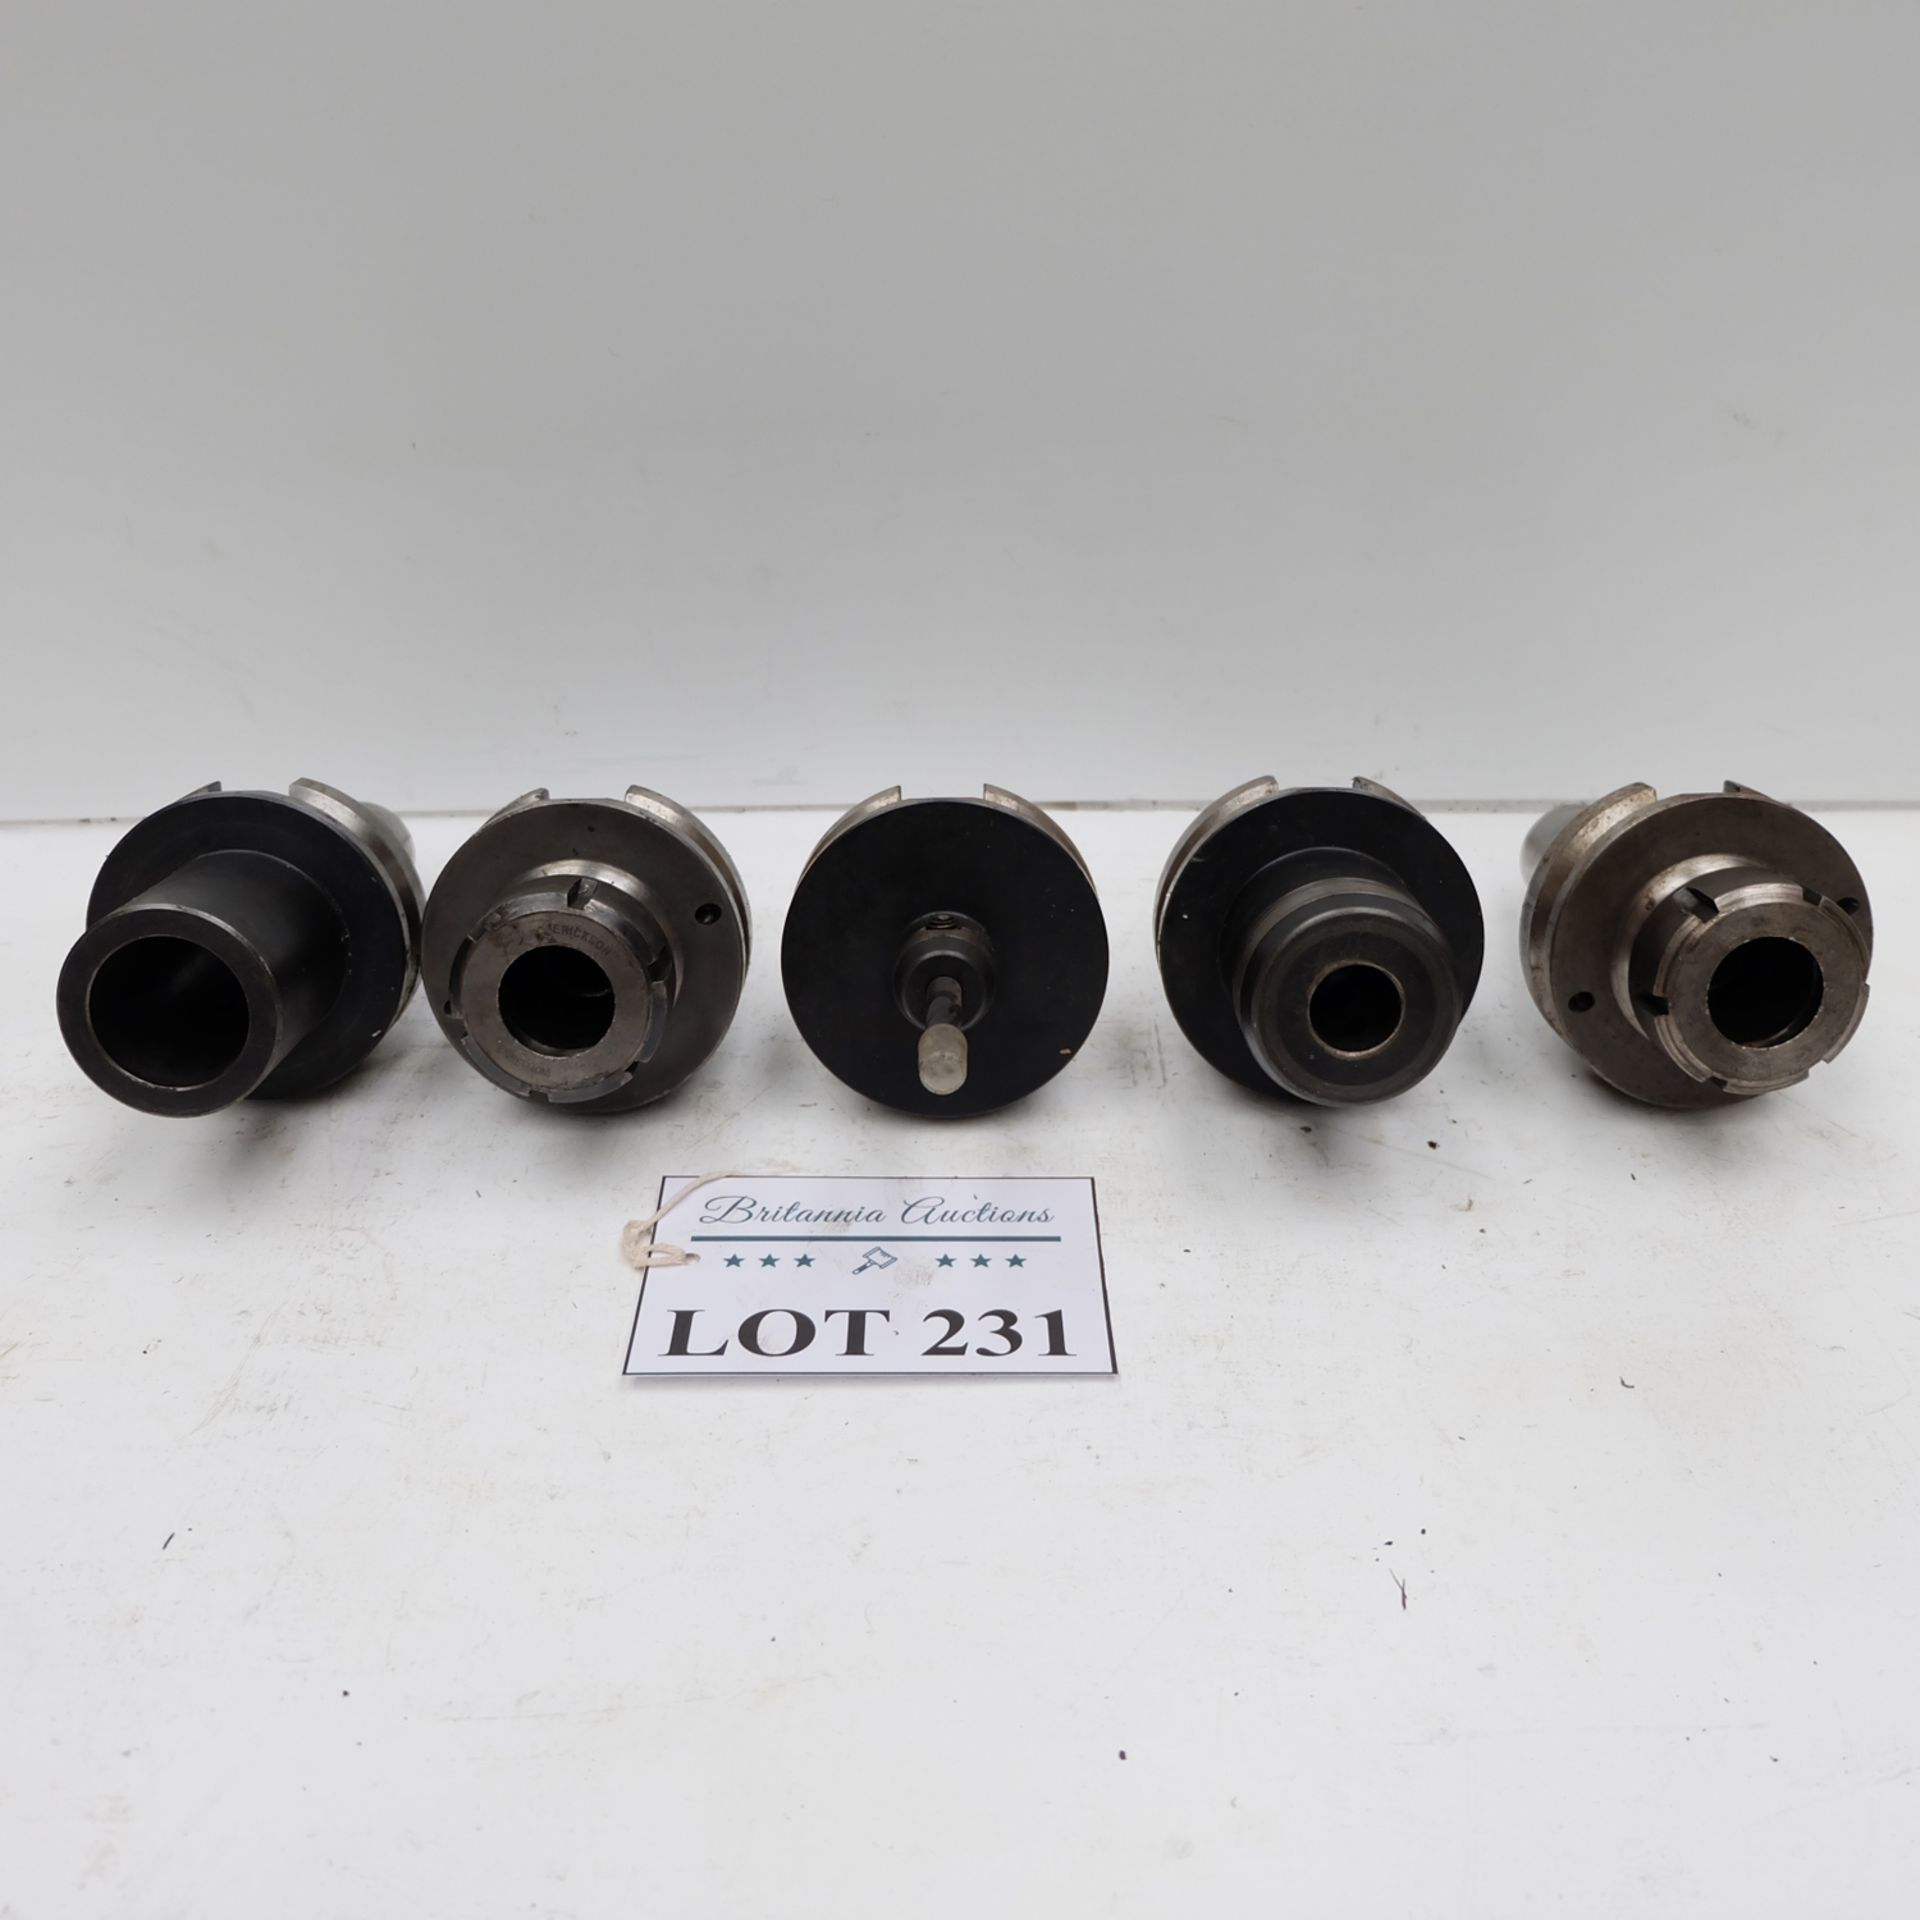 Quantity of 5 x BT 50 Spindle Tooling. - Image 3 of 3